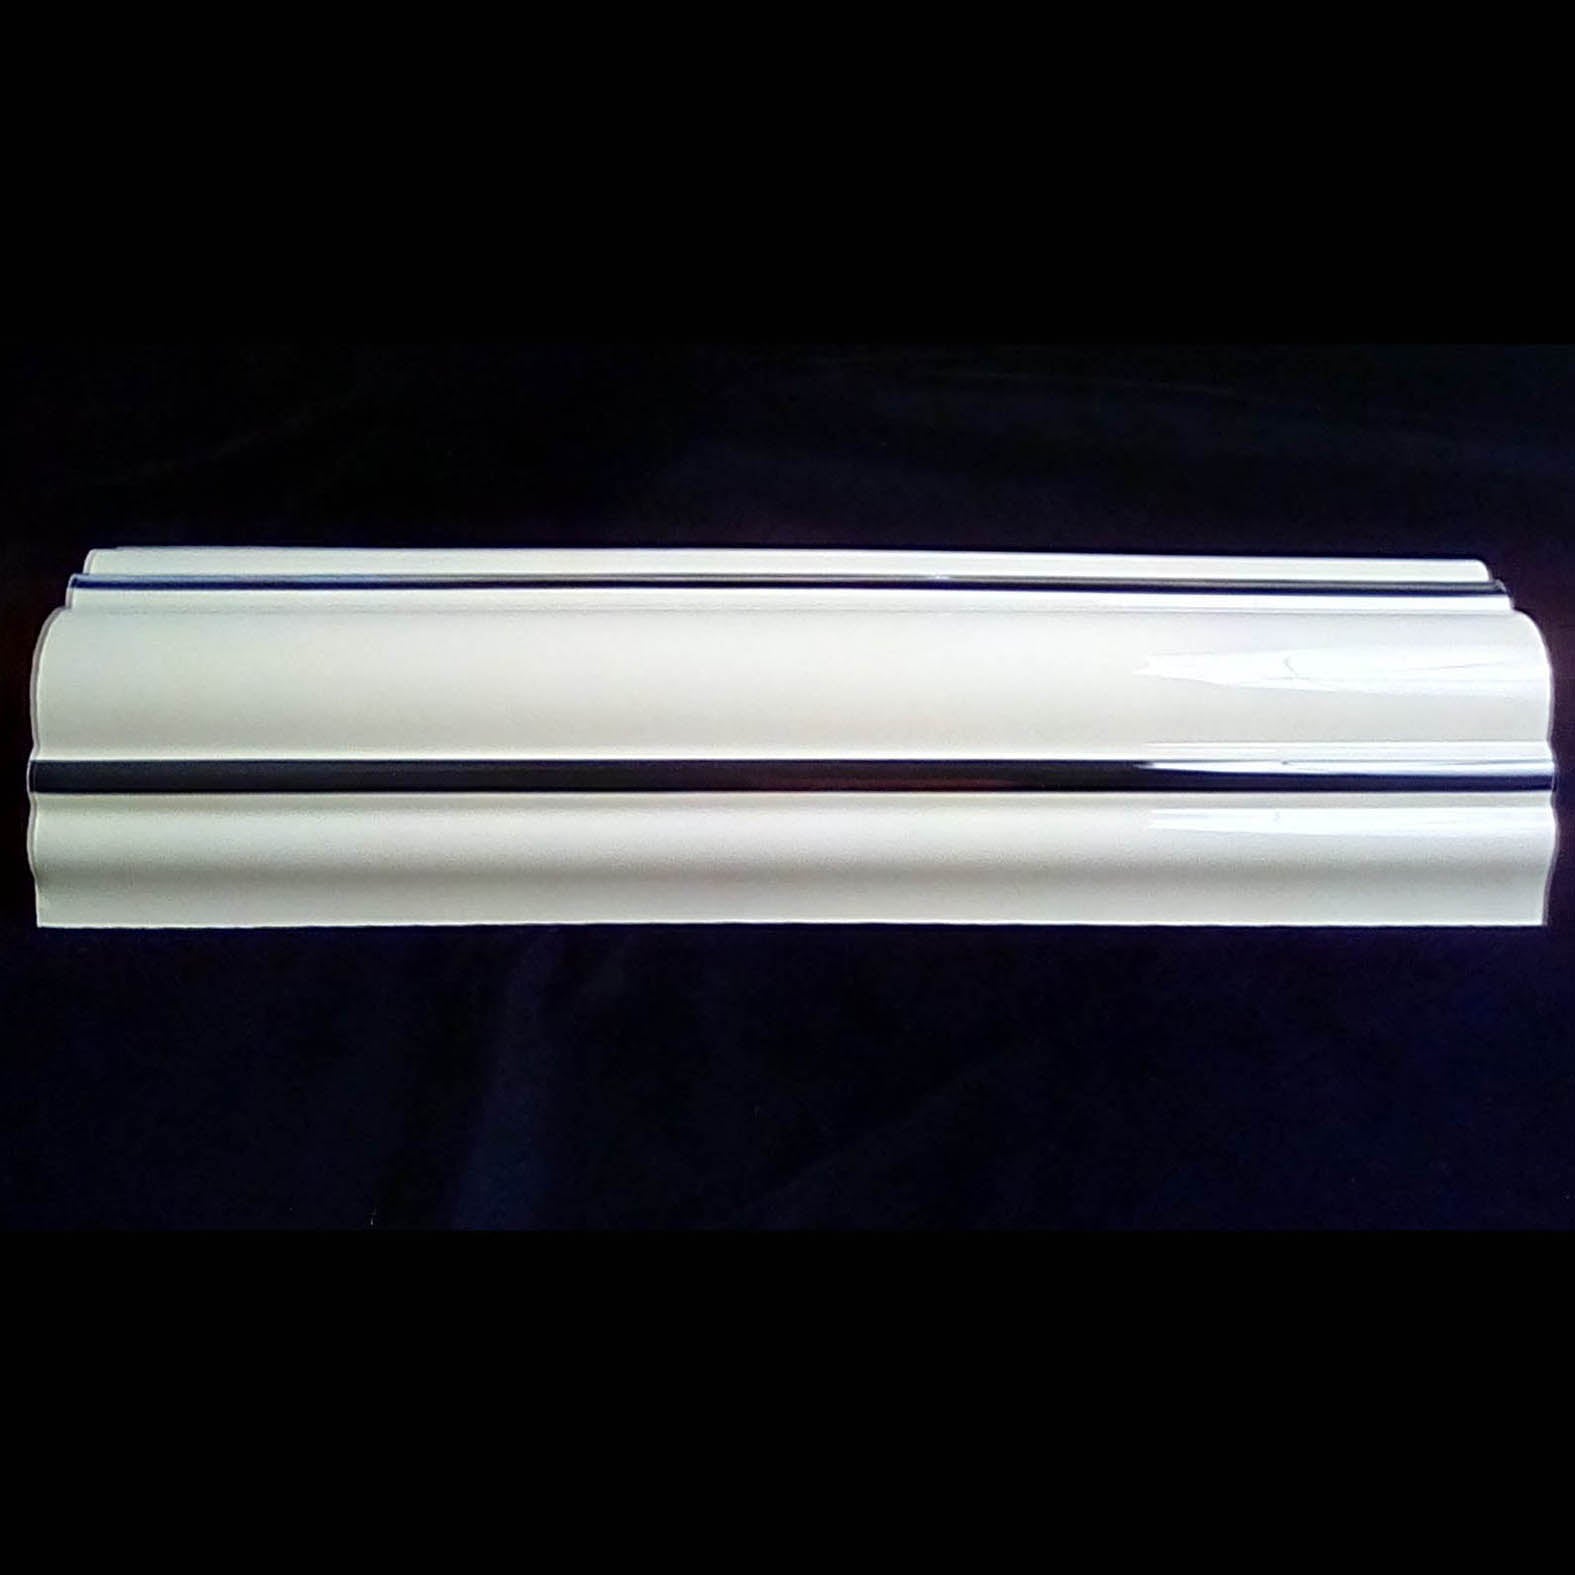 Rock-Ola Jukebox Outer Pilaster Cream Plastic Straight (57386-01-LF) **CURRENTLY 4-8 WEEK LEAD TIME**